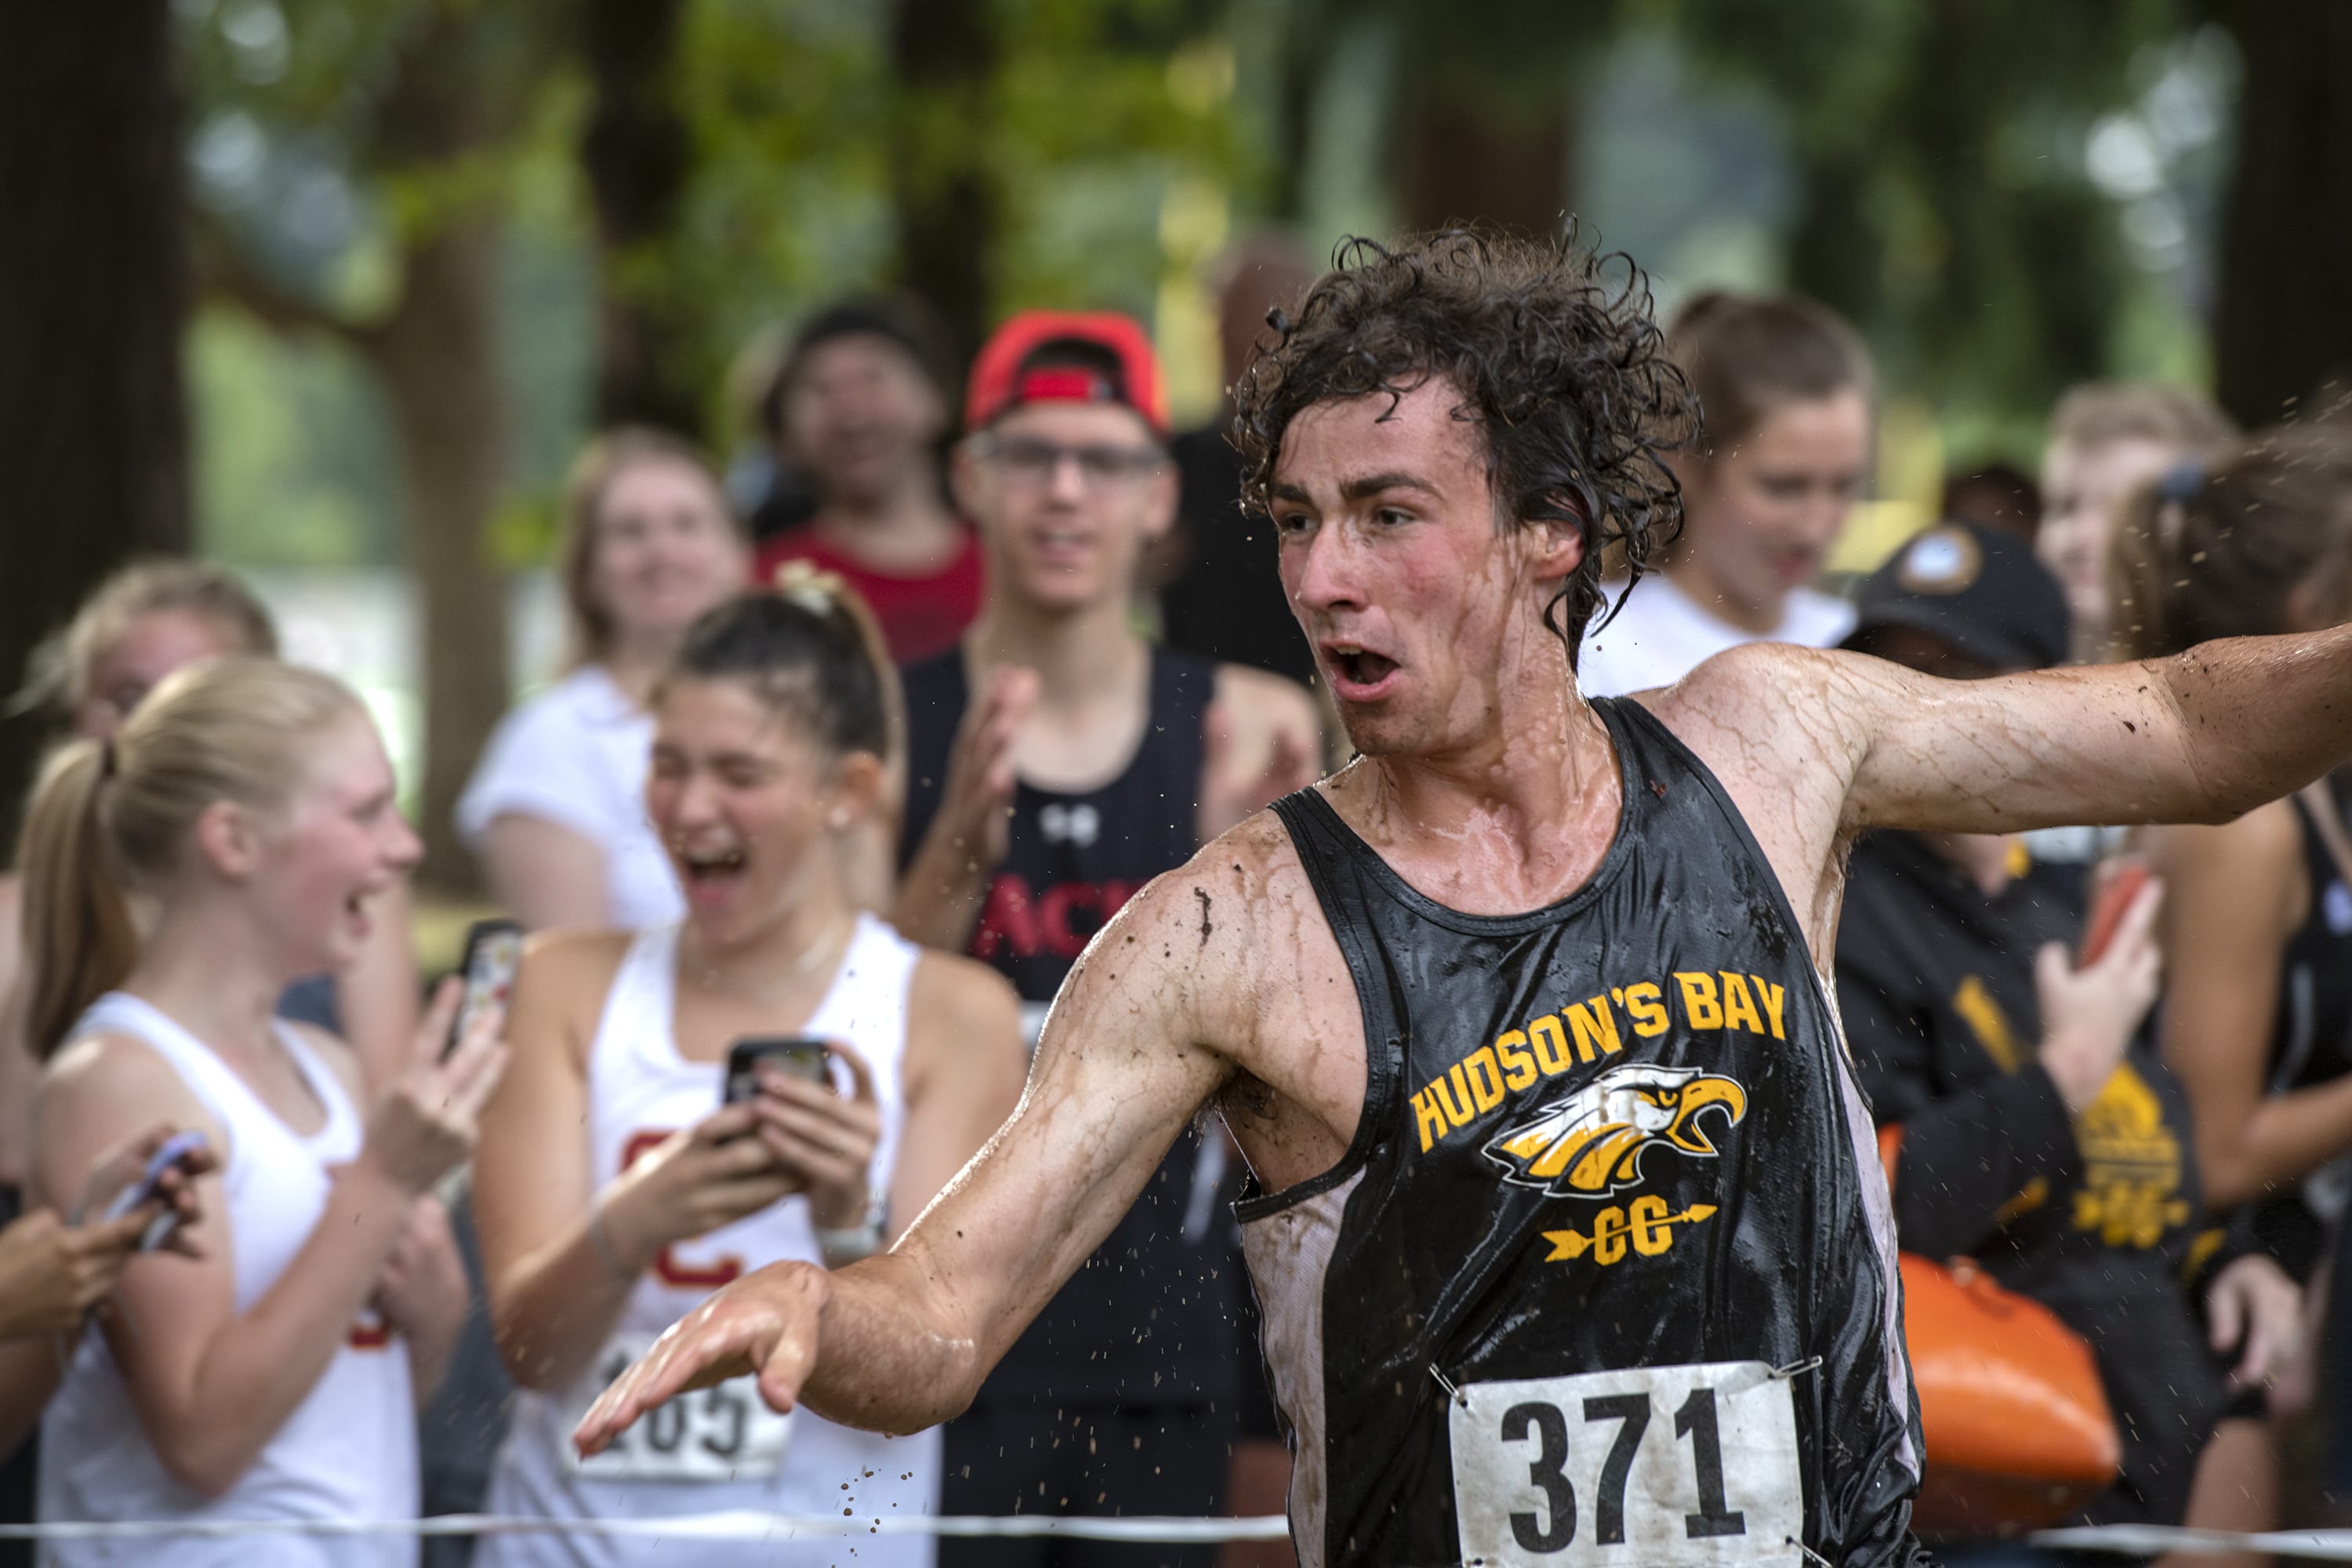 Hudson Bay's Brian Loop emerges from the water hazard during the Steve Maas Hudson's Bay Run-A-Ree cross country meet at Hudson's Bay High School on Friday afternoon, September 13, 2019.